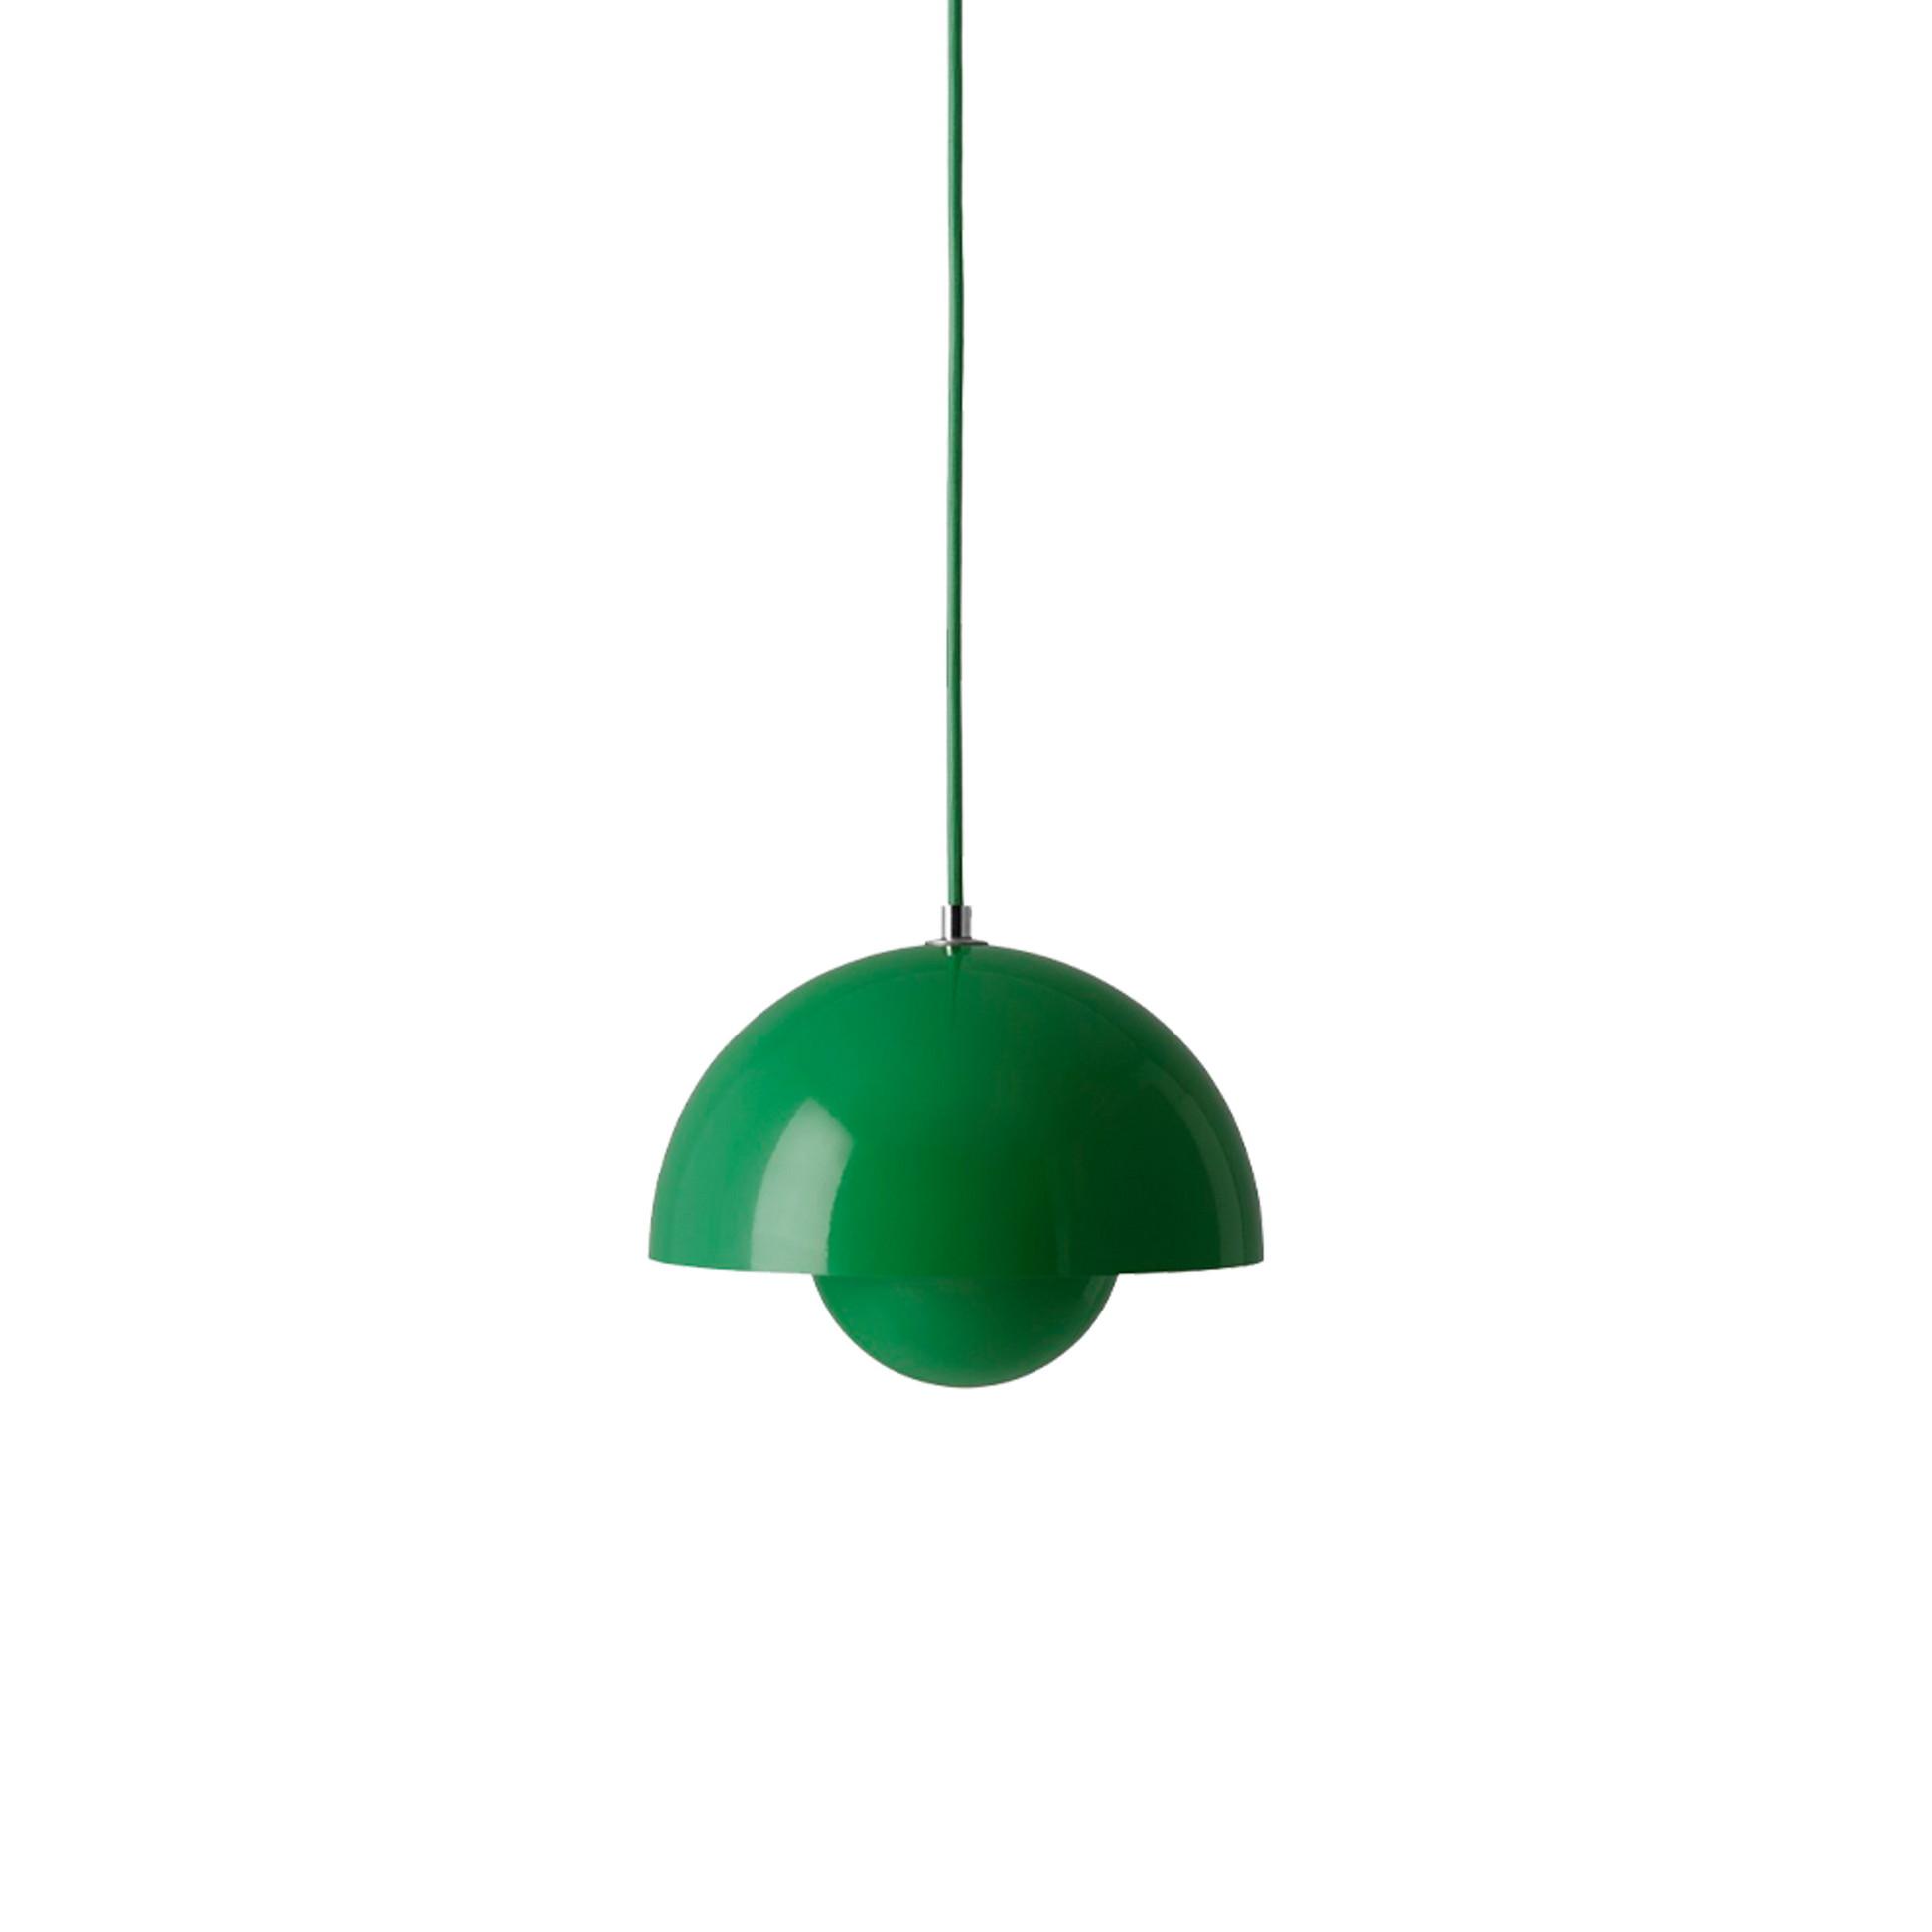 Flowerpot VP1 Pendant Lamp by &tradition #Signal Green